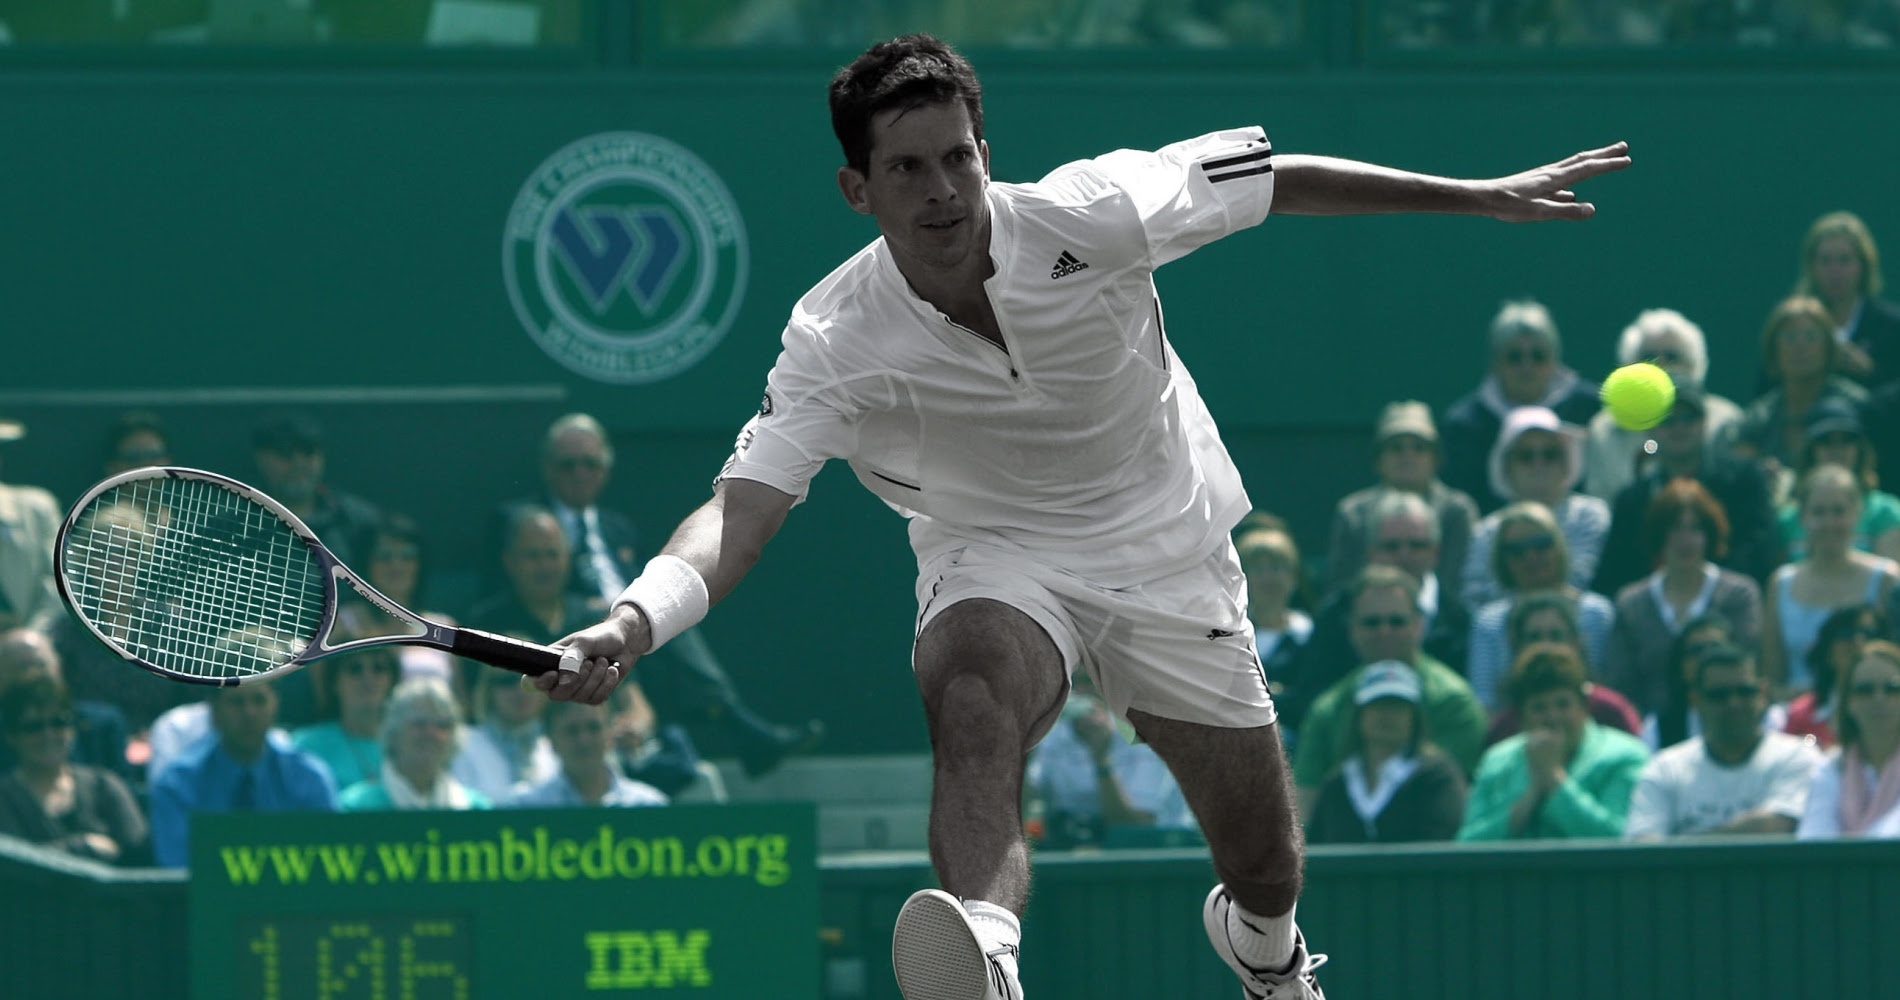 June 28, The day Henman played his last at Wimbledon - Tennis Majors